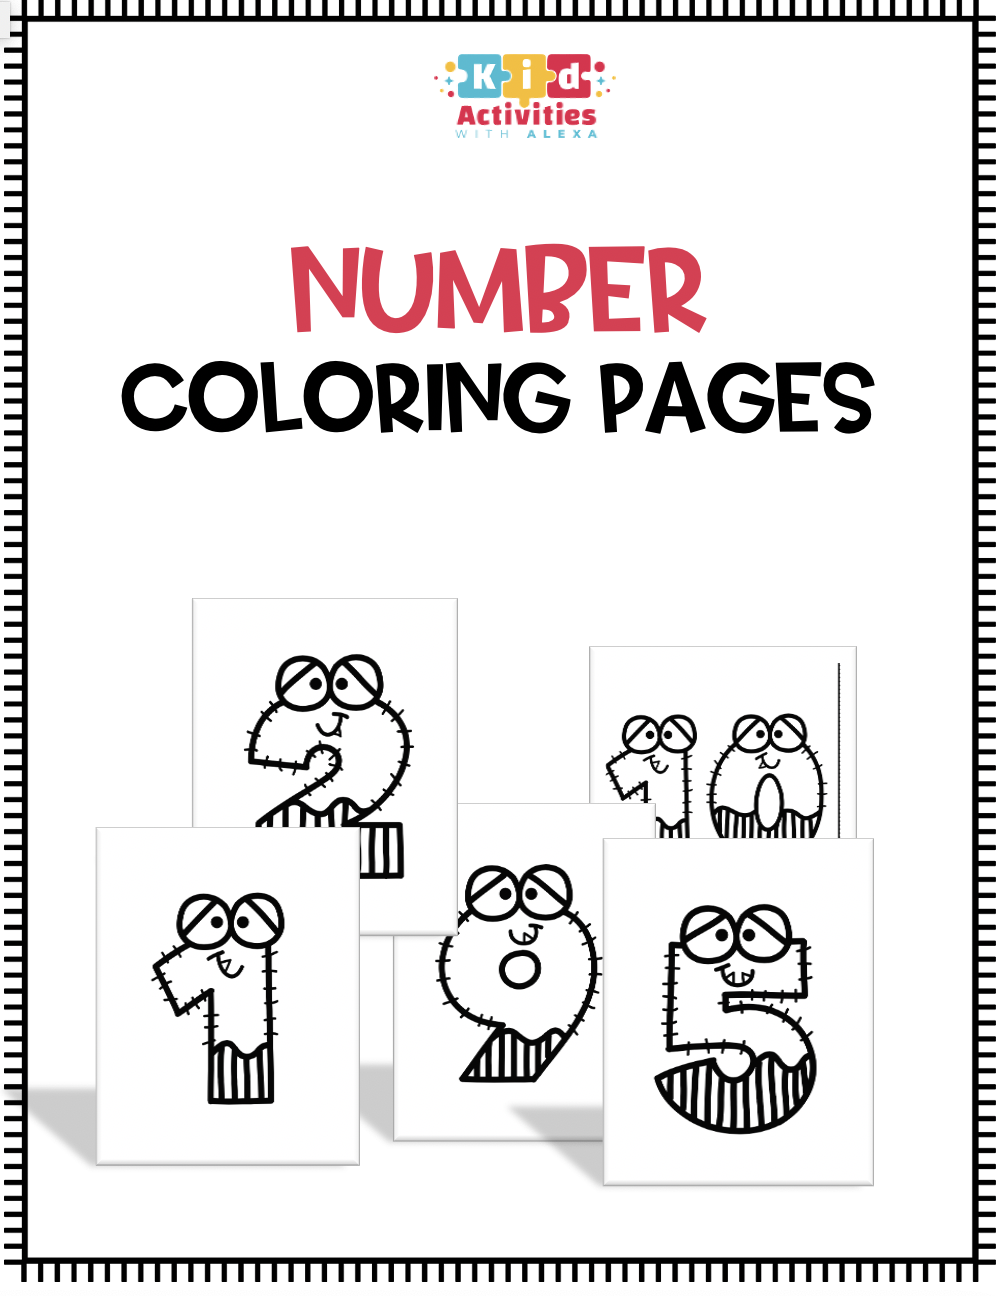 Learn Numbers Coloring Pages (Pdf) - Kid Activities With Alexa